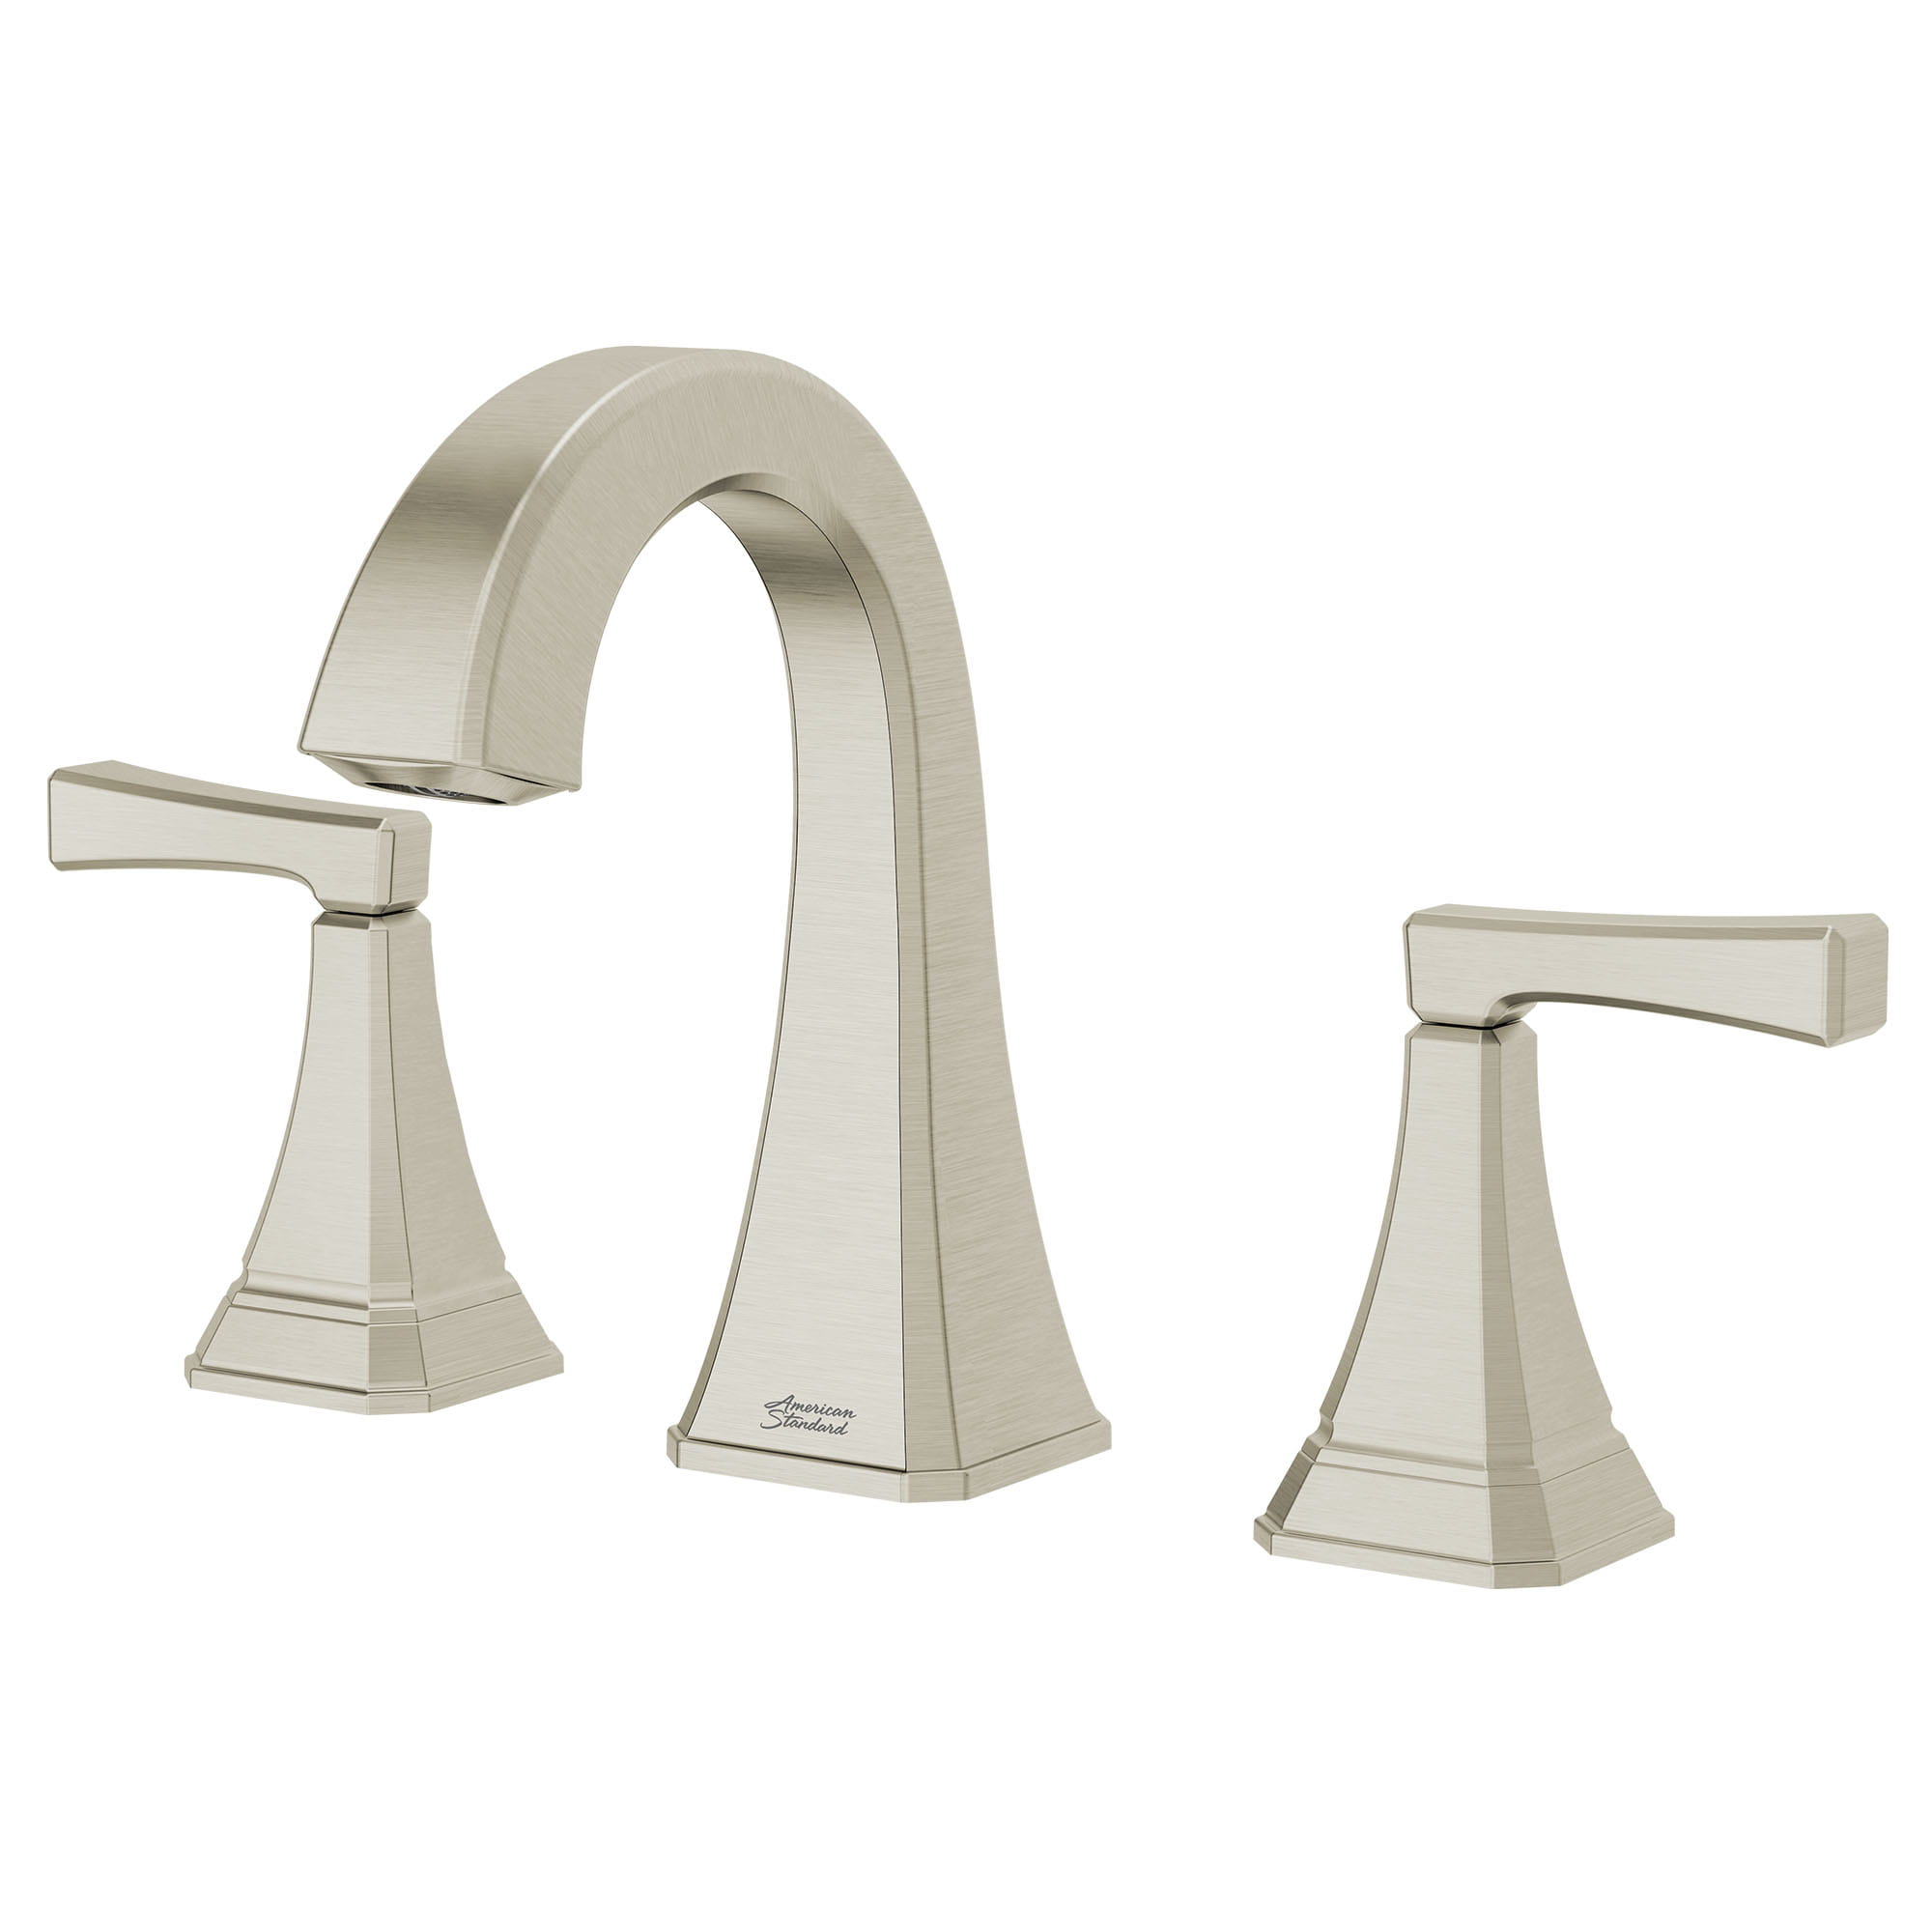 Westerly® 8-Inch Widespread 2-Handle Bathroom Faucet 1.2 gpm/4.5 L/min With Lever Handles